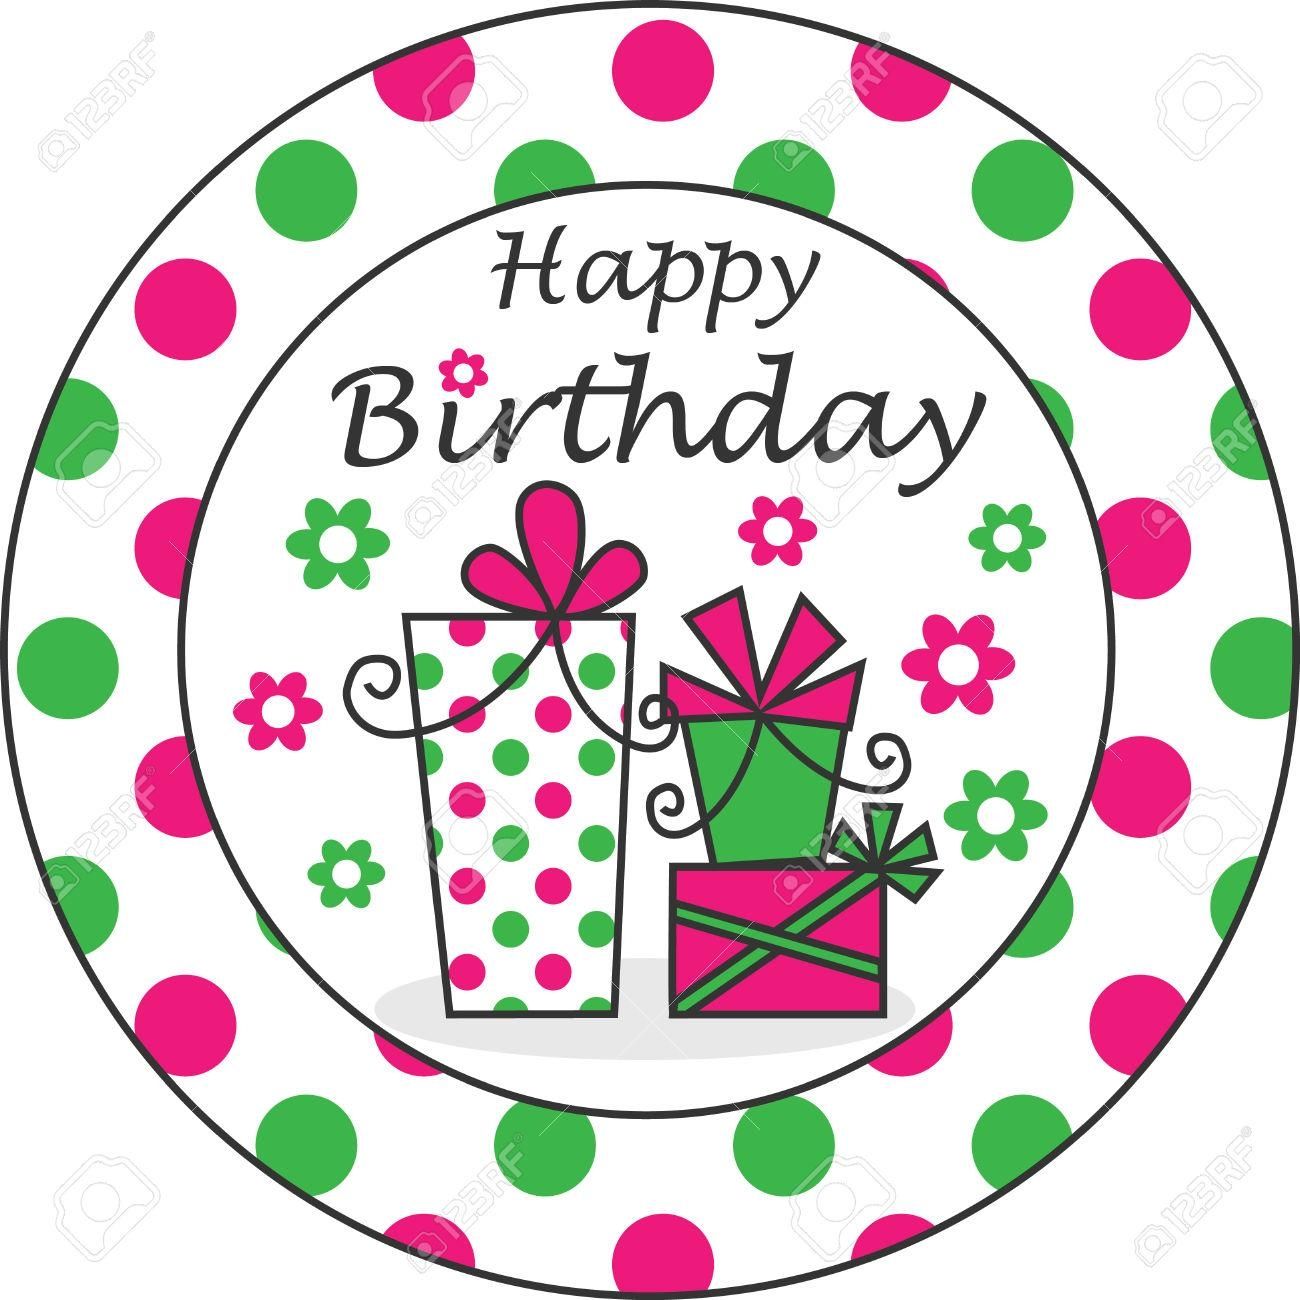 Happy Birthday Banners Wall Decorations Royalty Free Cliparts With Regard To Happy Birthday Wall Art (Photo 20 of 20)